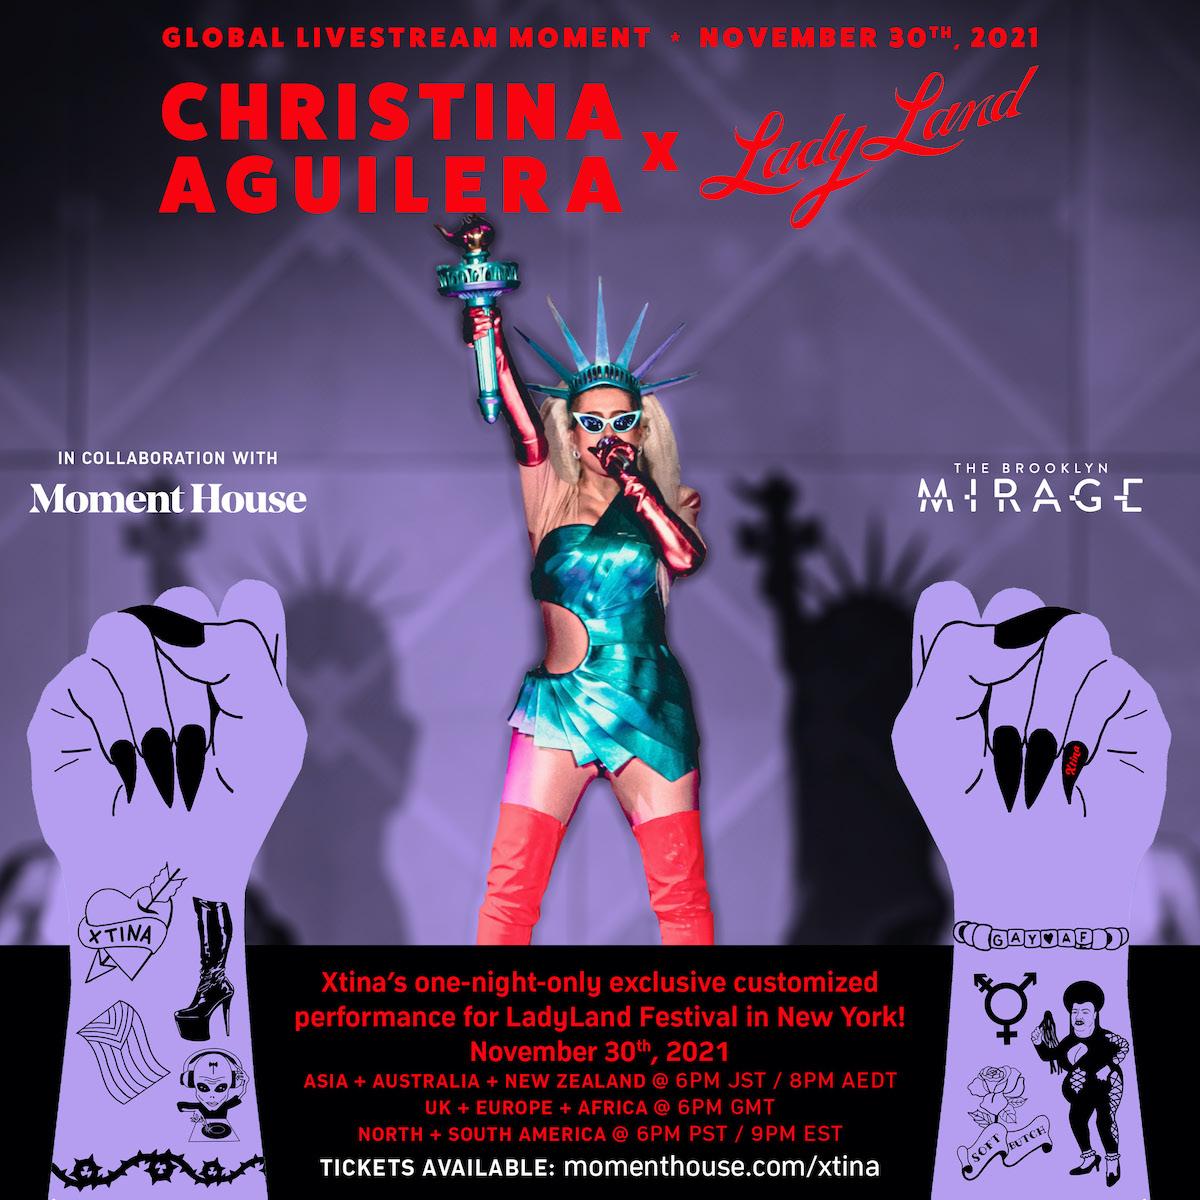 Christina Aguilera’s Ladyland 2021 Headlining Performance To Stream On Moment House For One Night Only